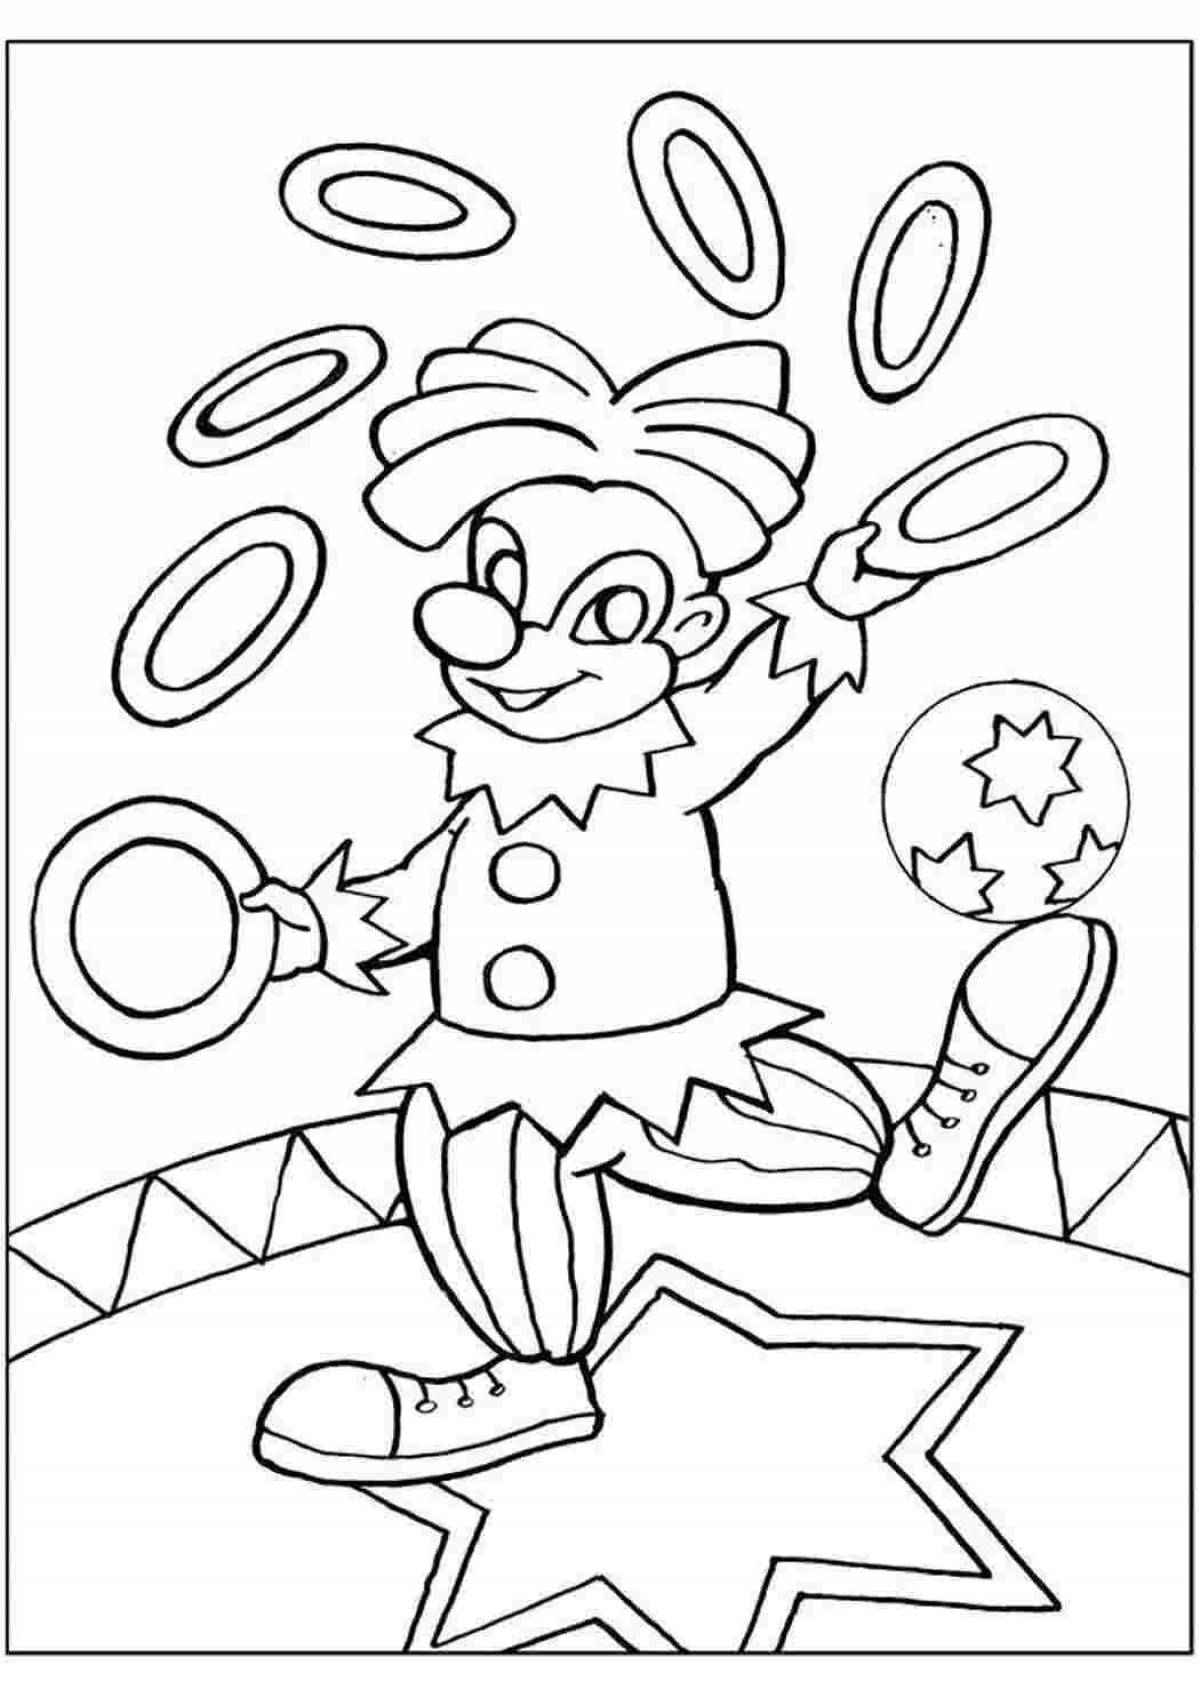 Fancy circus coloring book for little ones